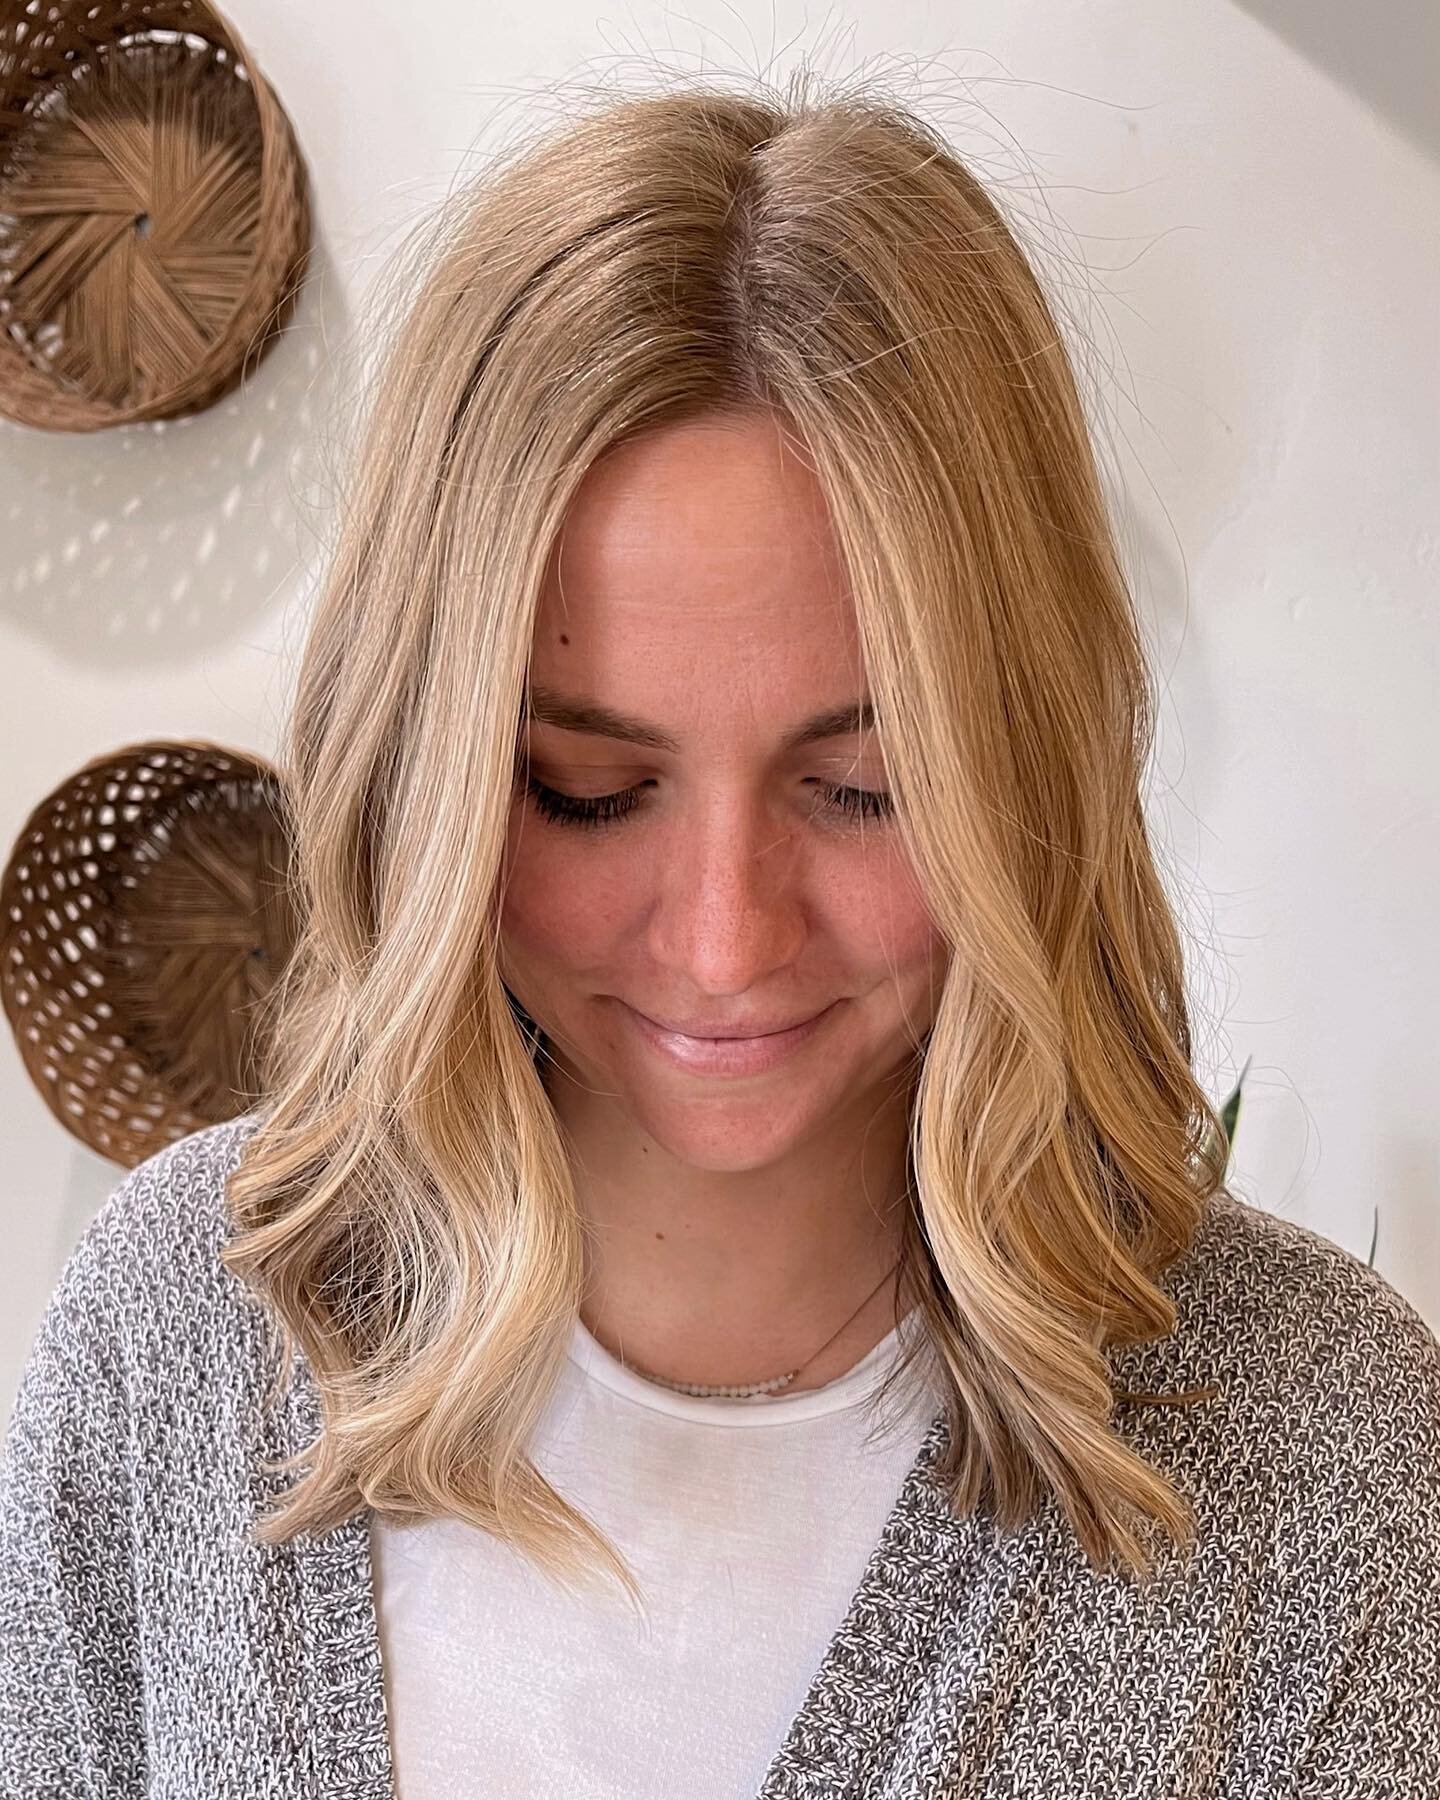 Super natural ⚡️CHECK. @mane_ivy full blonding technique for the WIN. @kaelahhope had never colored her hair ever, and wanted to have a natural but brighter blonde. We toned her with a warmer formula which keeps her golden for summer ✨